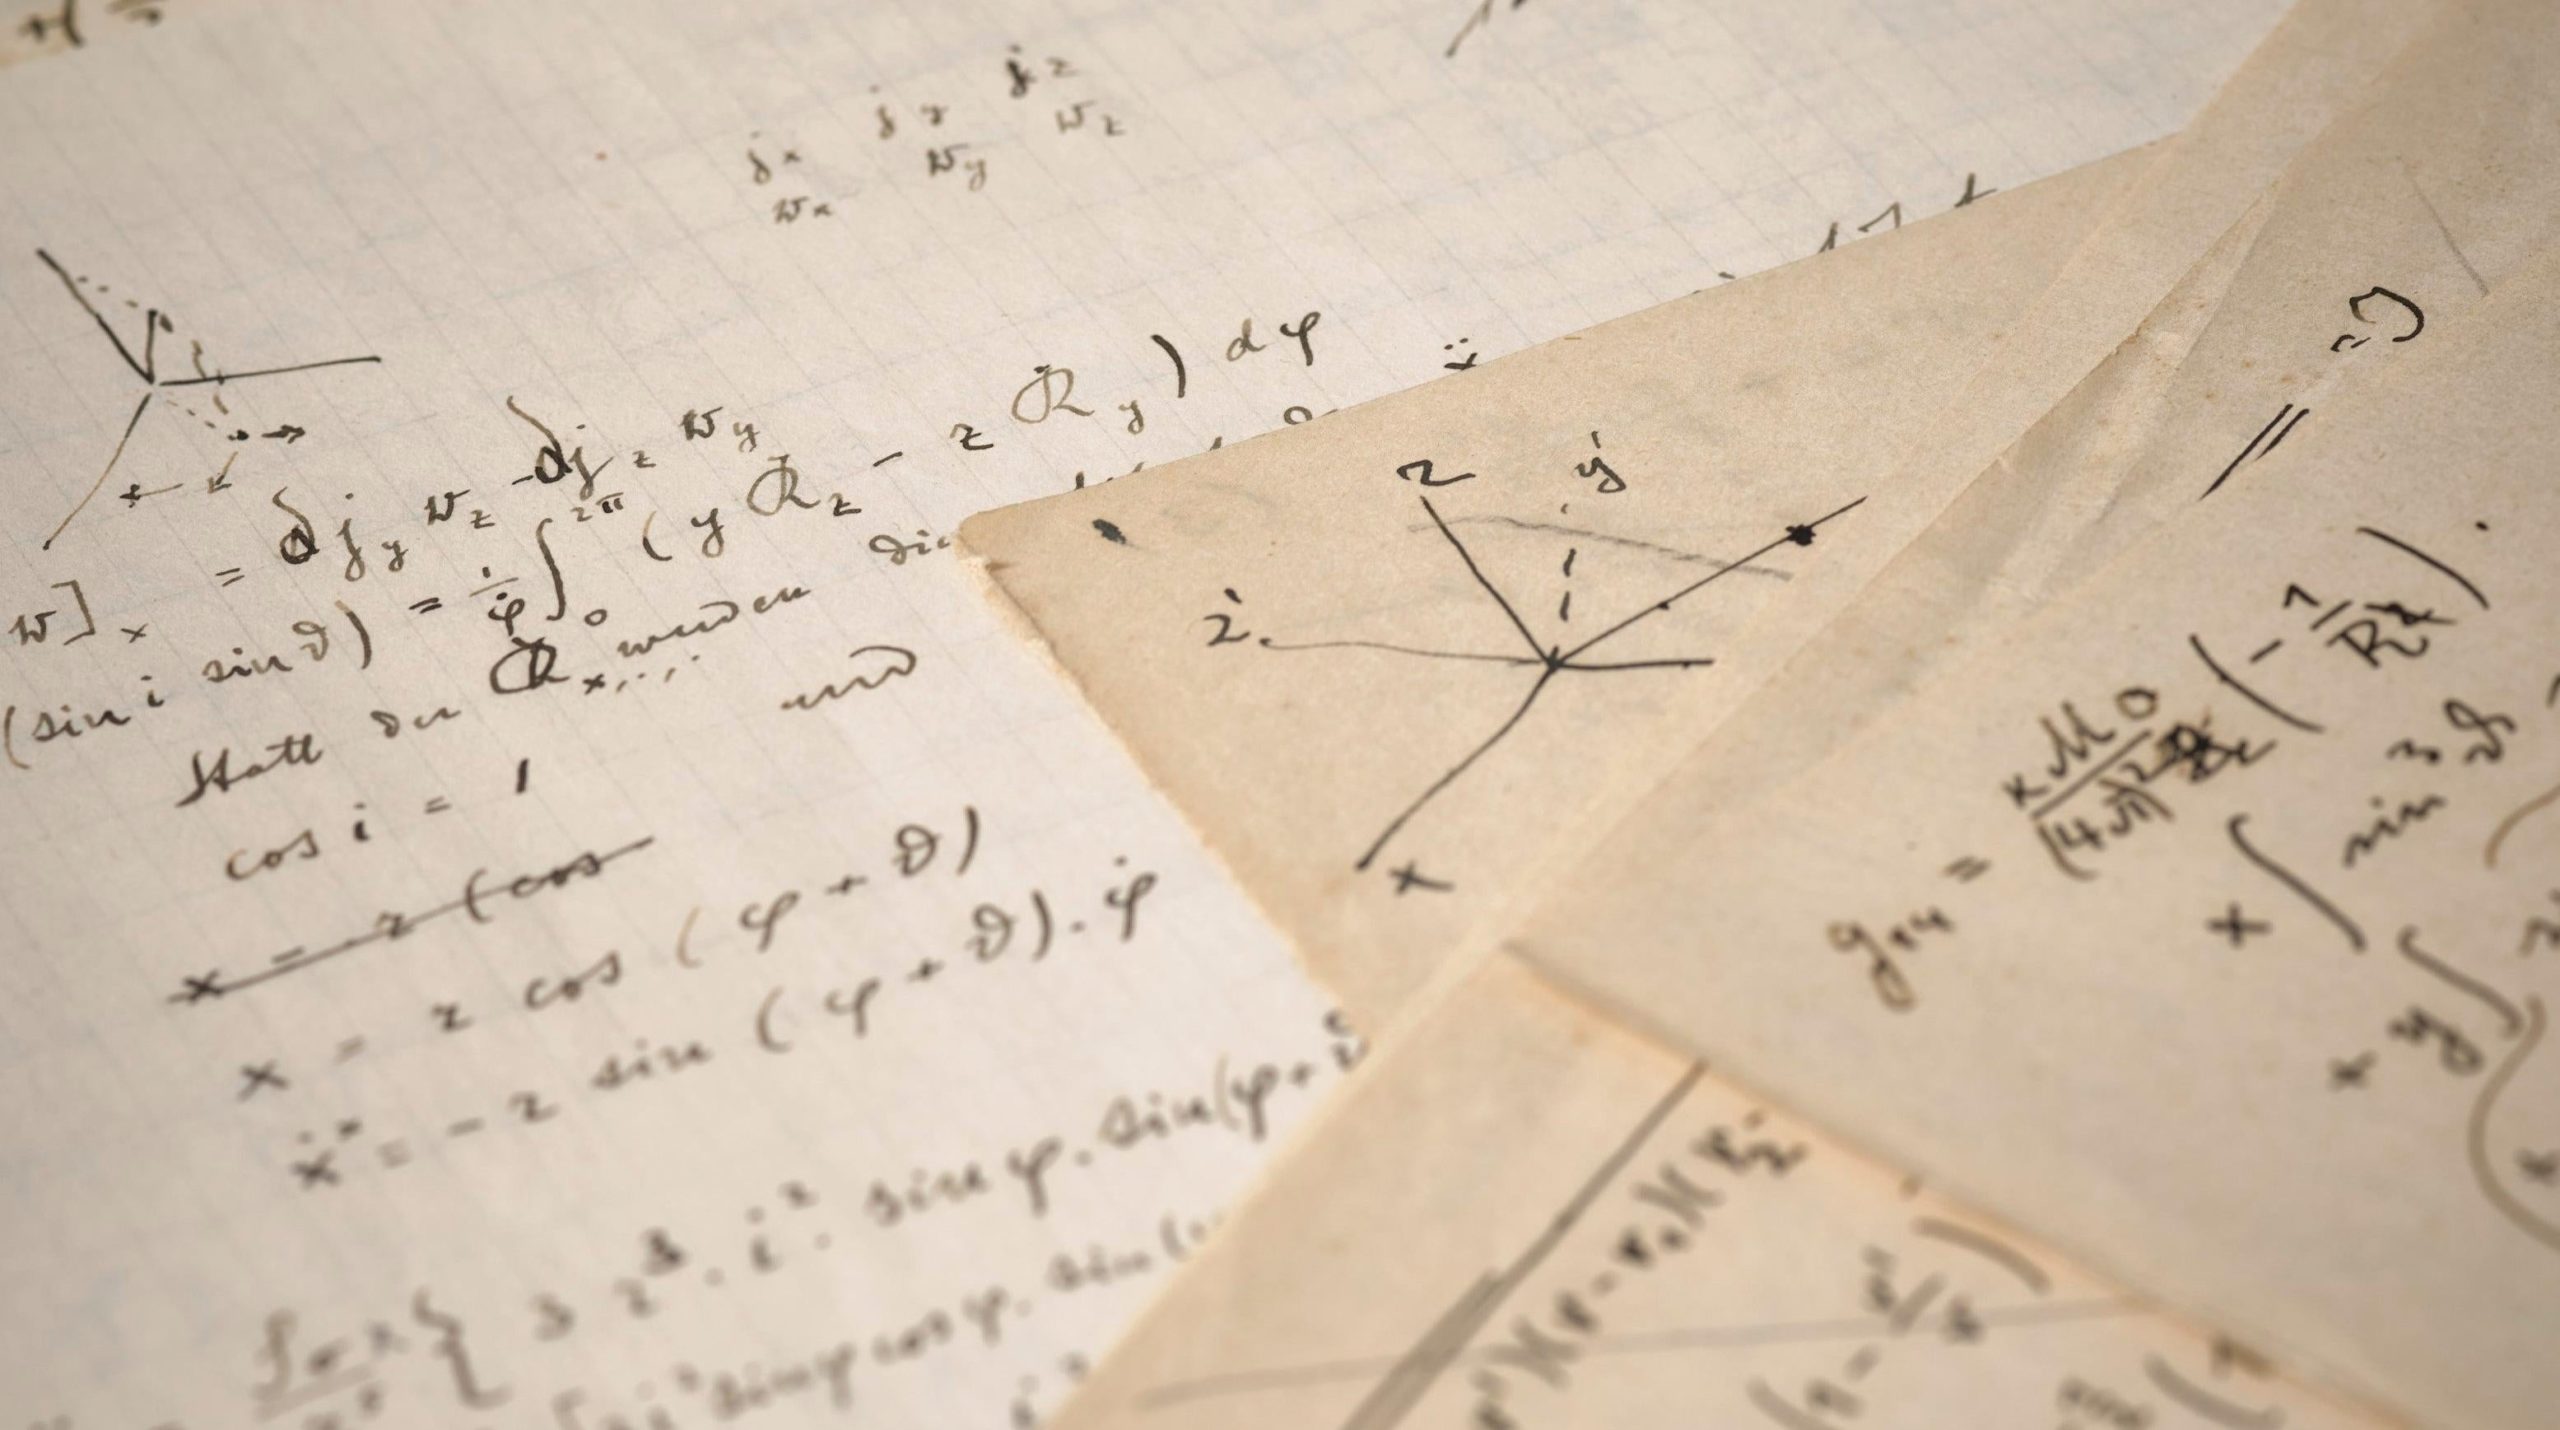 Several of the pages from the Einstein-Besso manuscript. (Photo: Christie’s Images LTD. 2021)